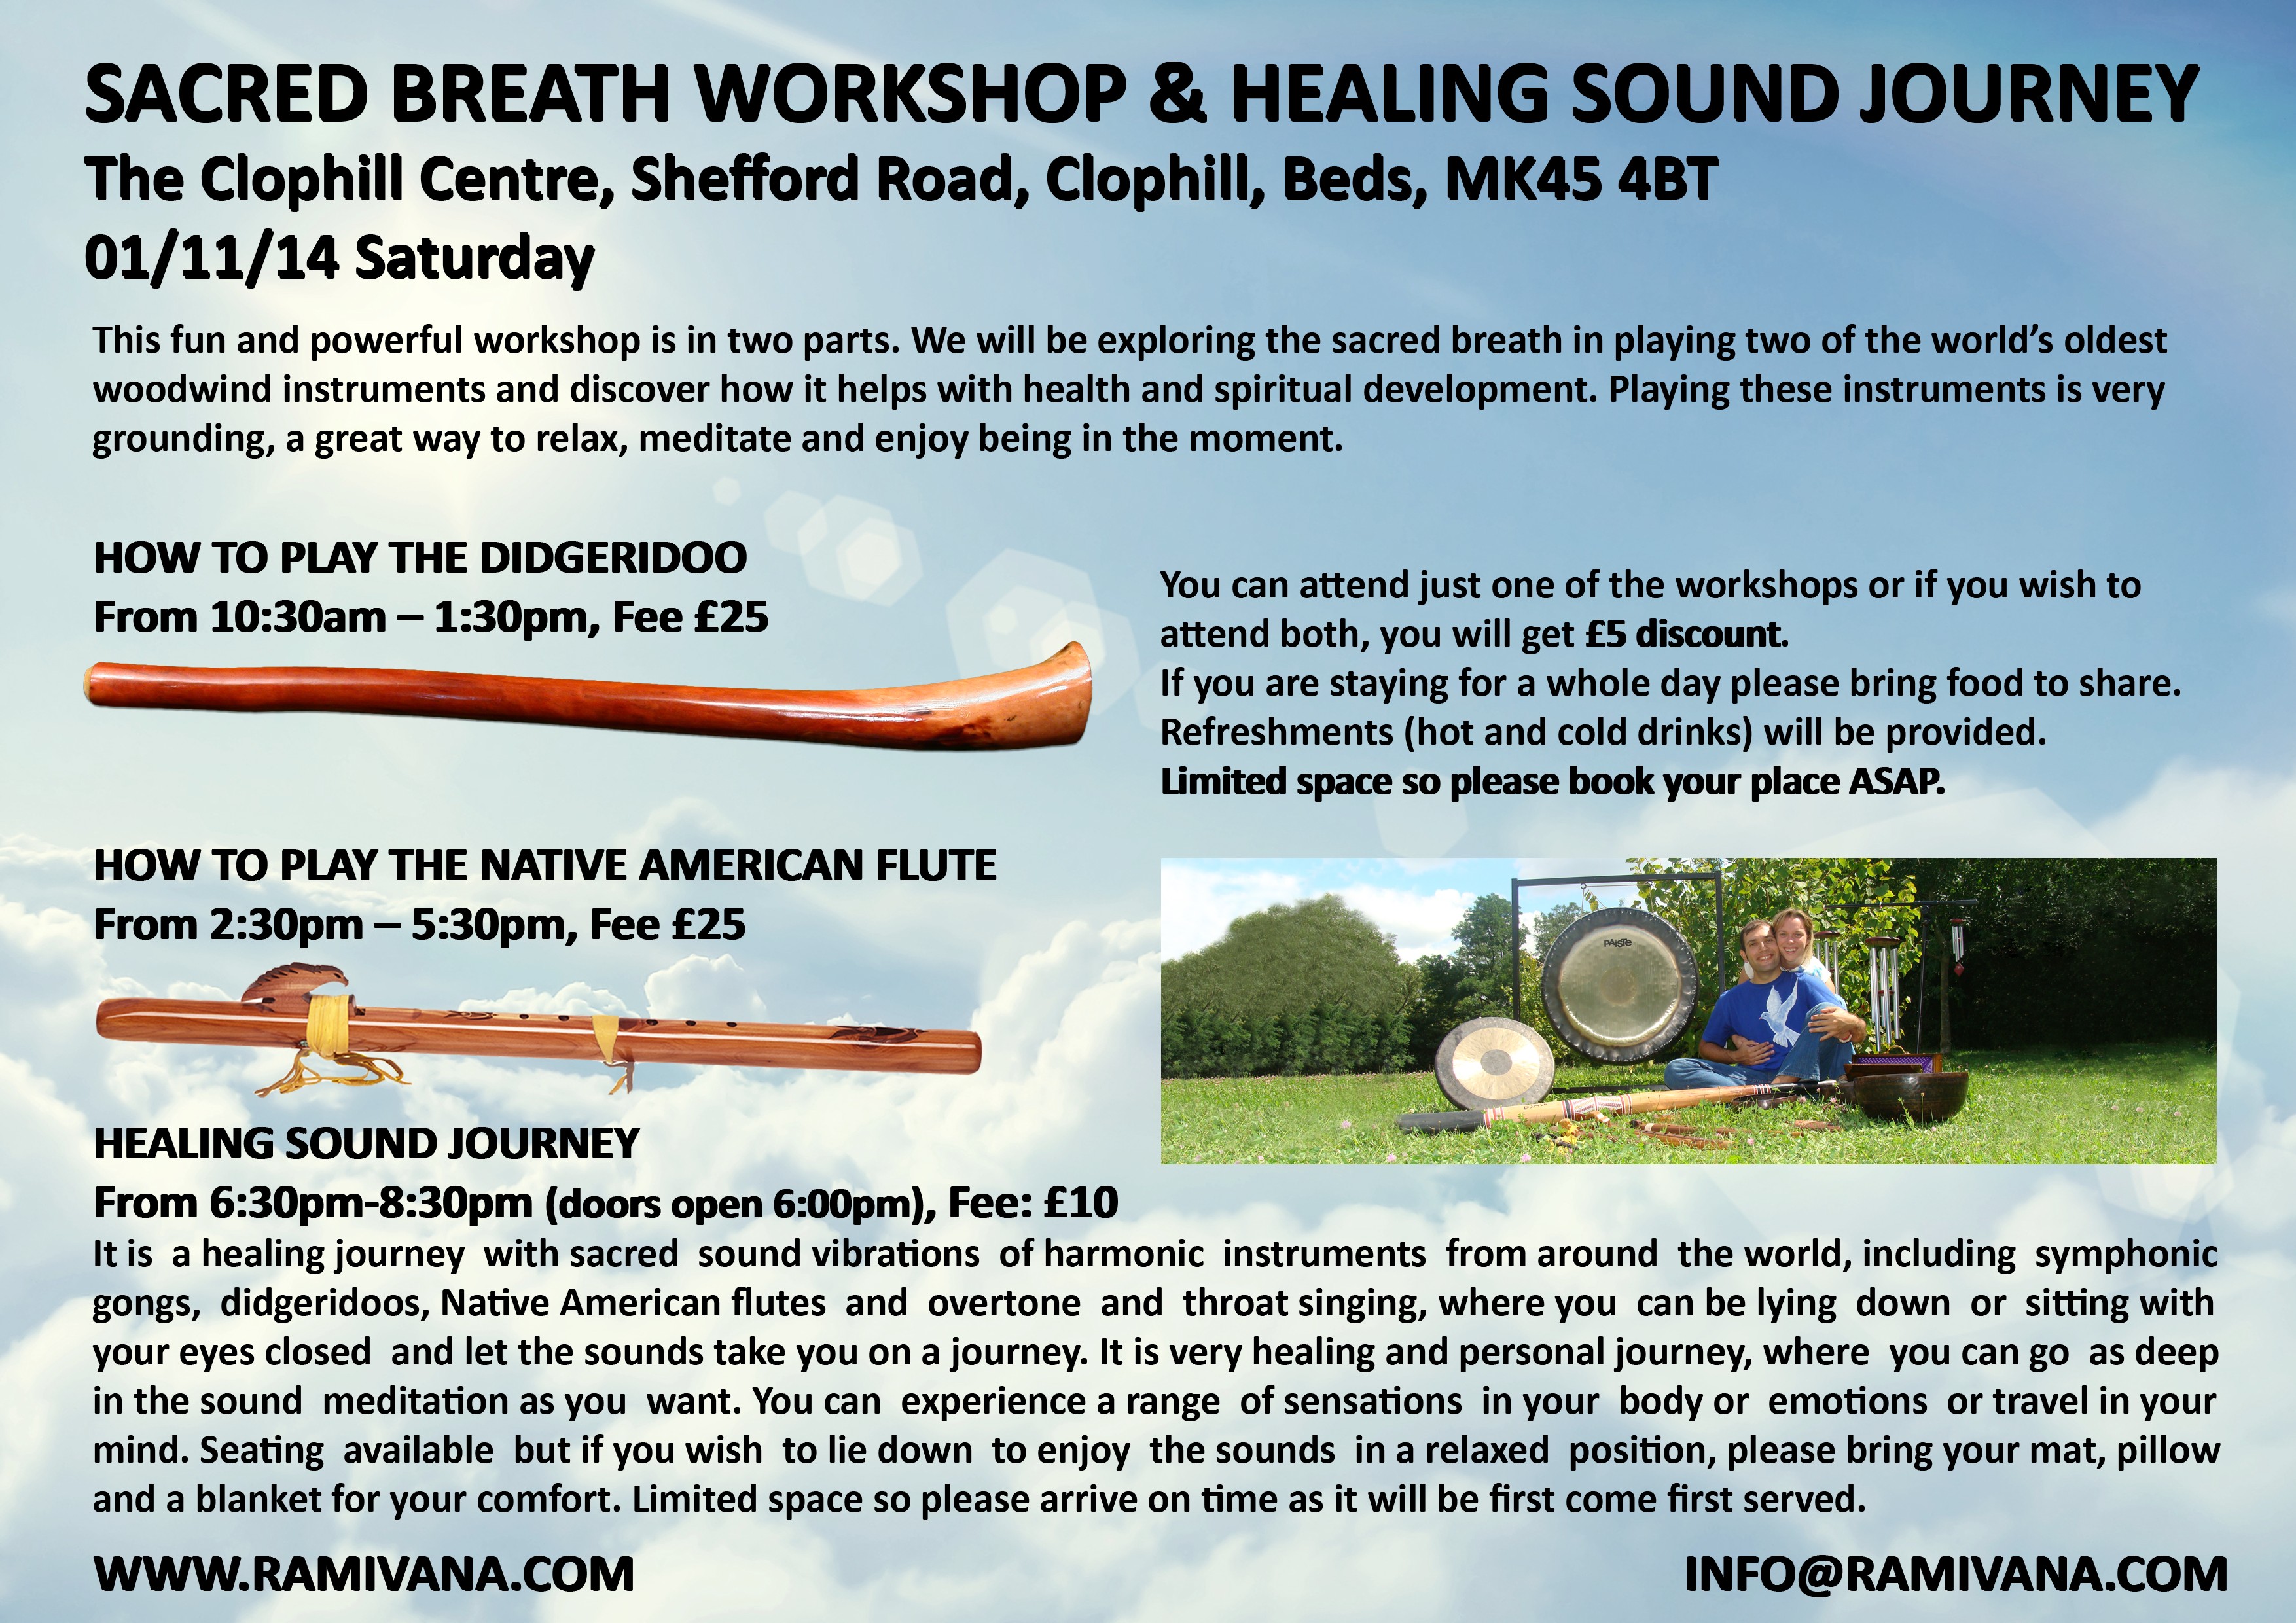 BEDFORDSHIRE - SACRED BREATH WORKSHOP HOW TO PLAY THE DIDGERIDOO        